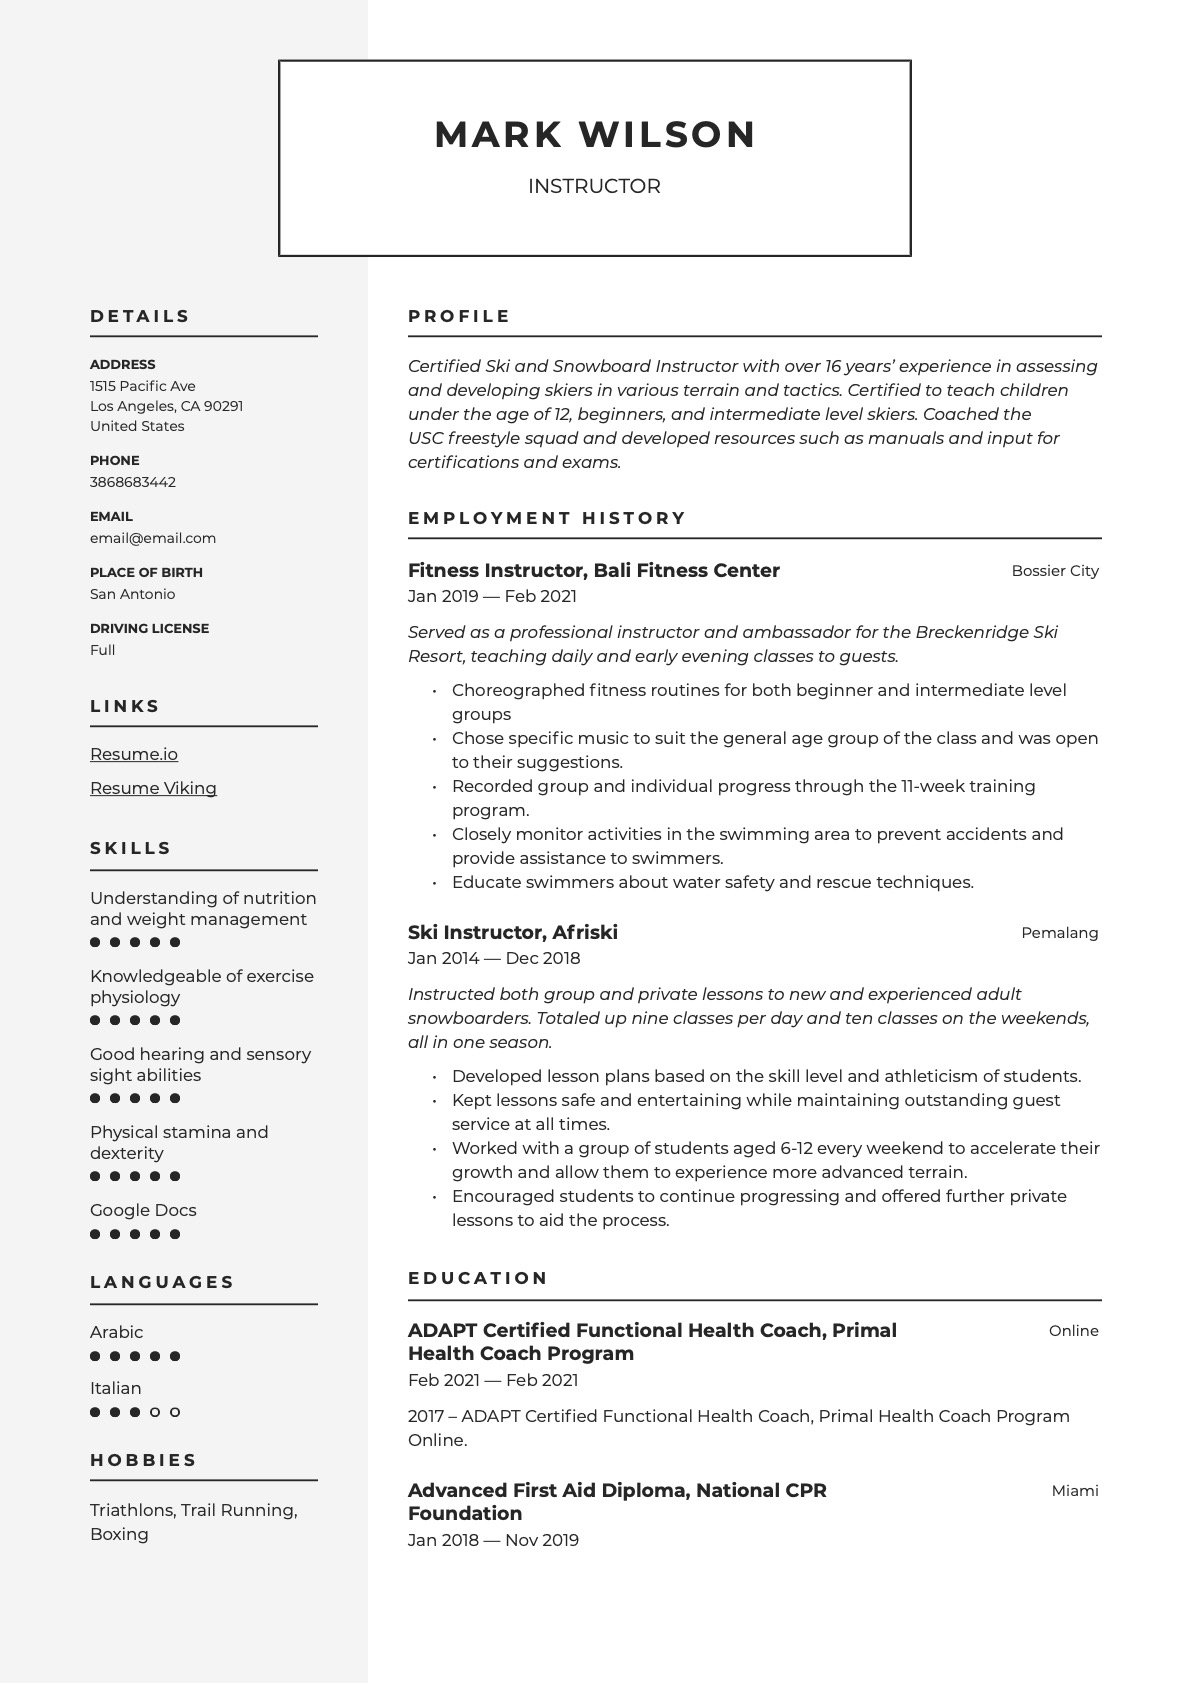 Example Resume Instructor-8